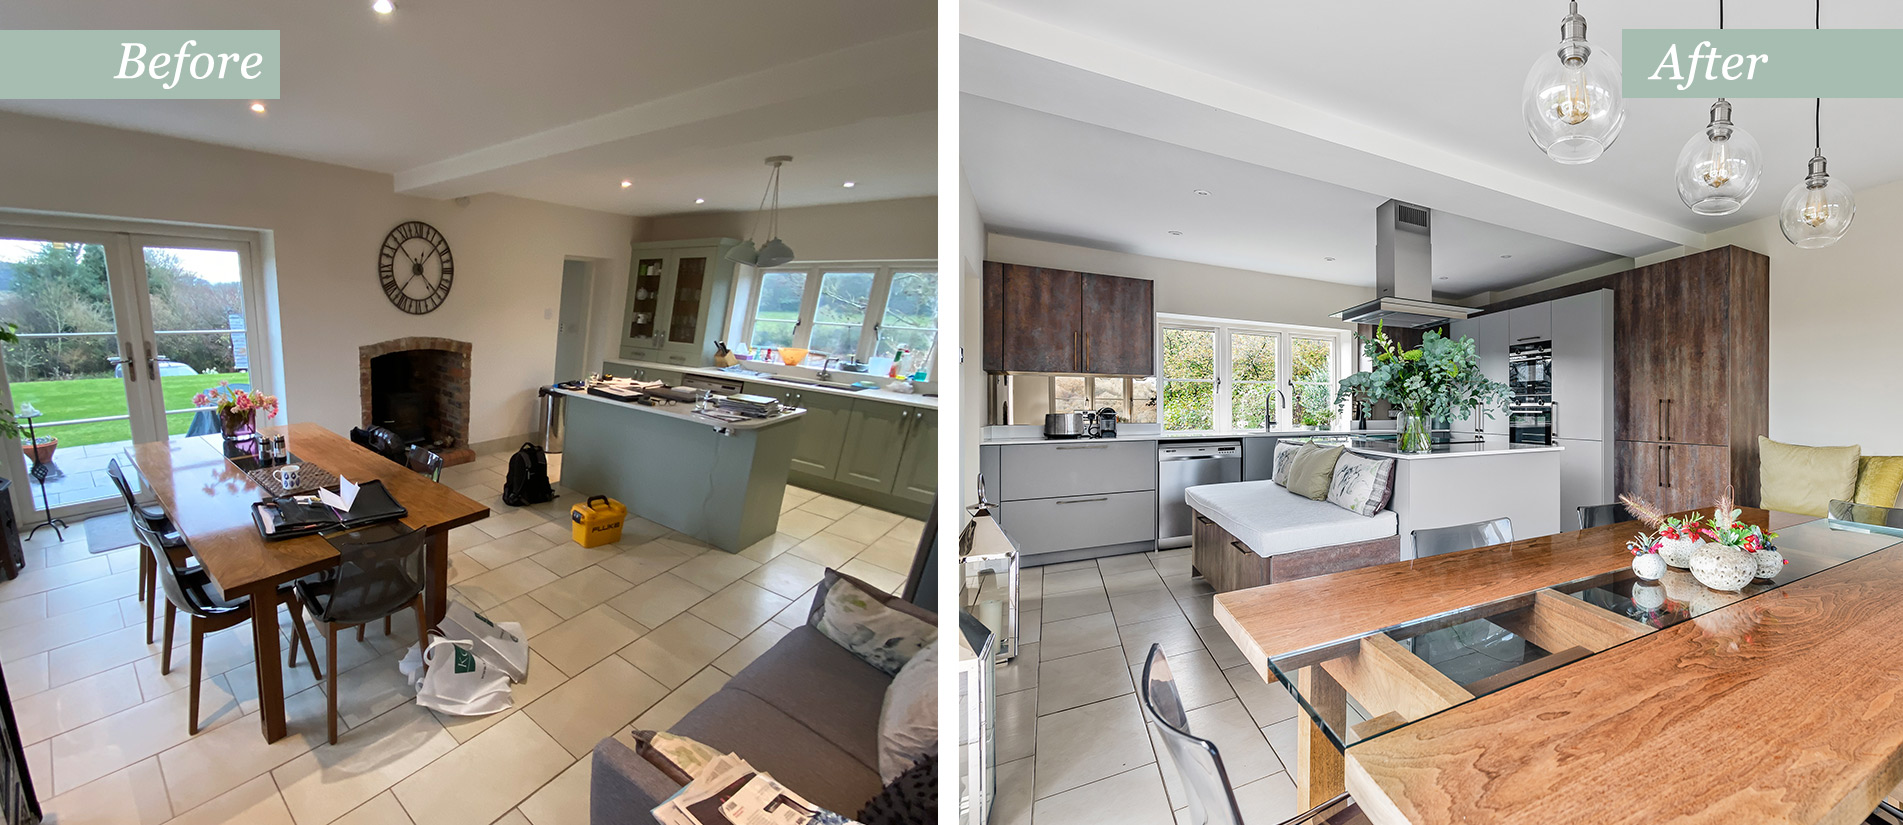 country kitchen before and after renovation